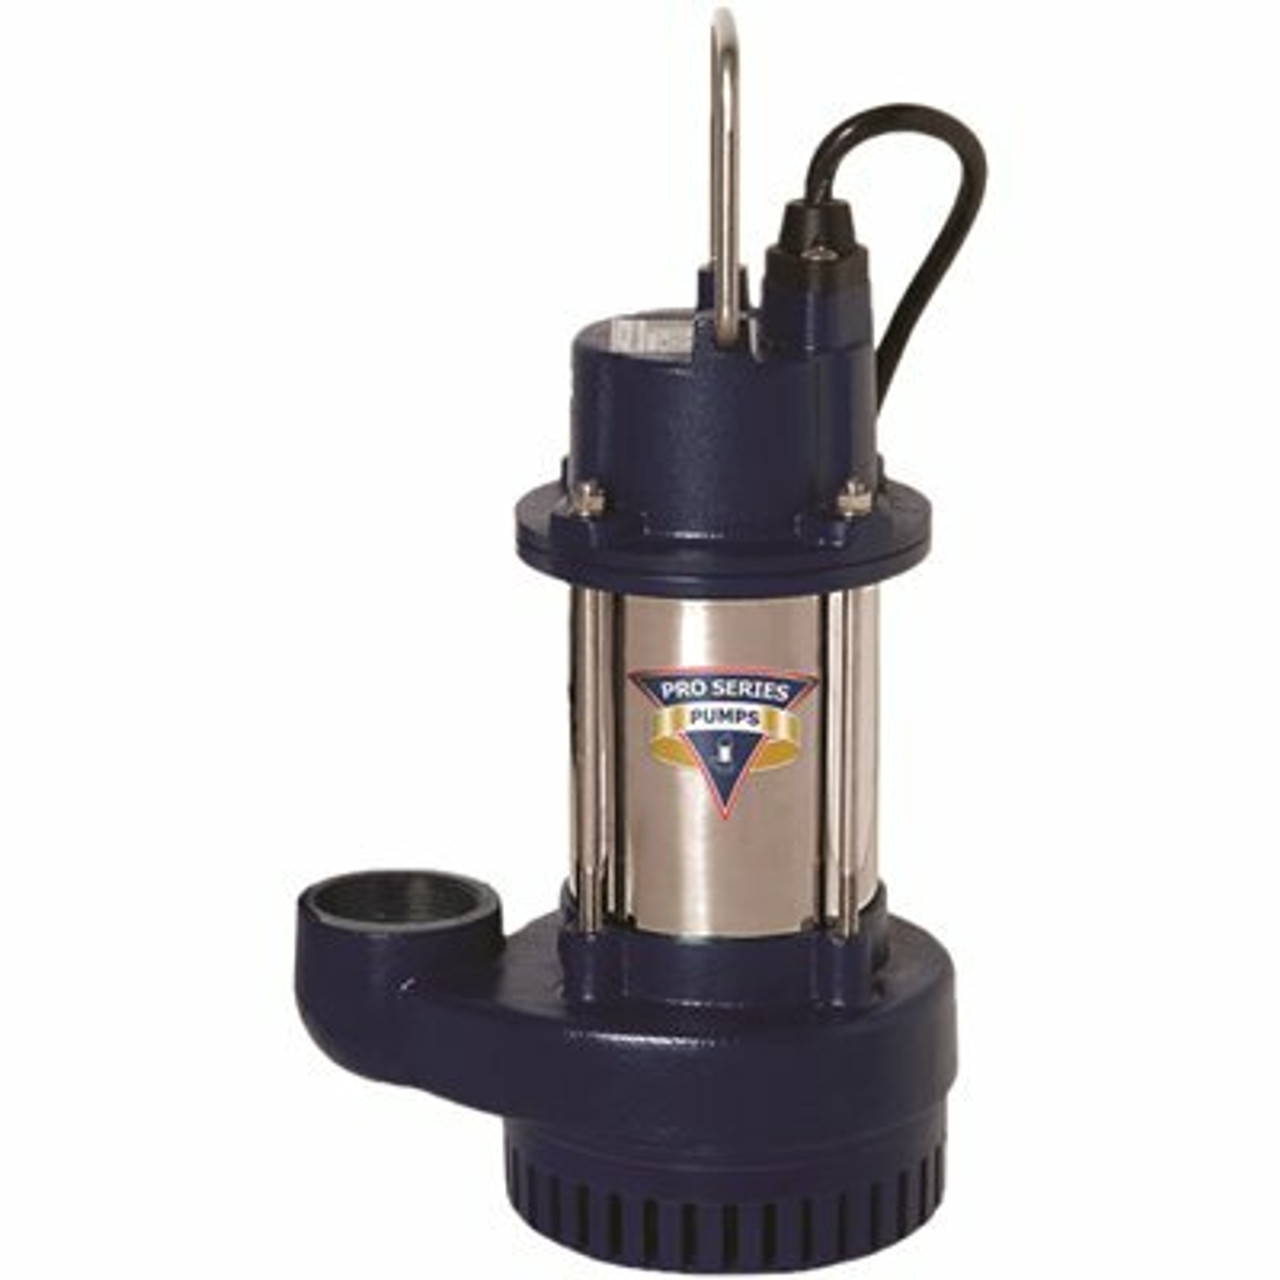 Pro Series Pumps 1/2 Hp Cast Iron / Stainless Steel Submersible Sump Pump